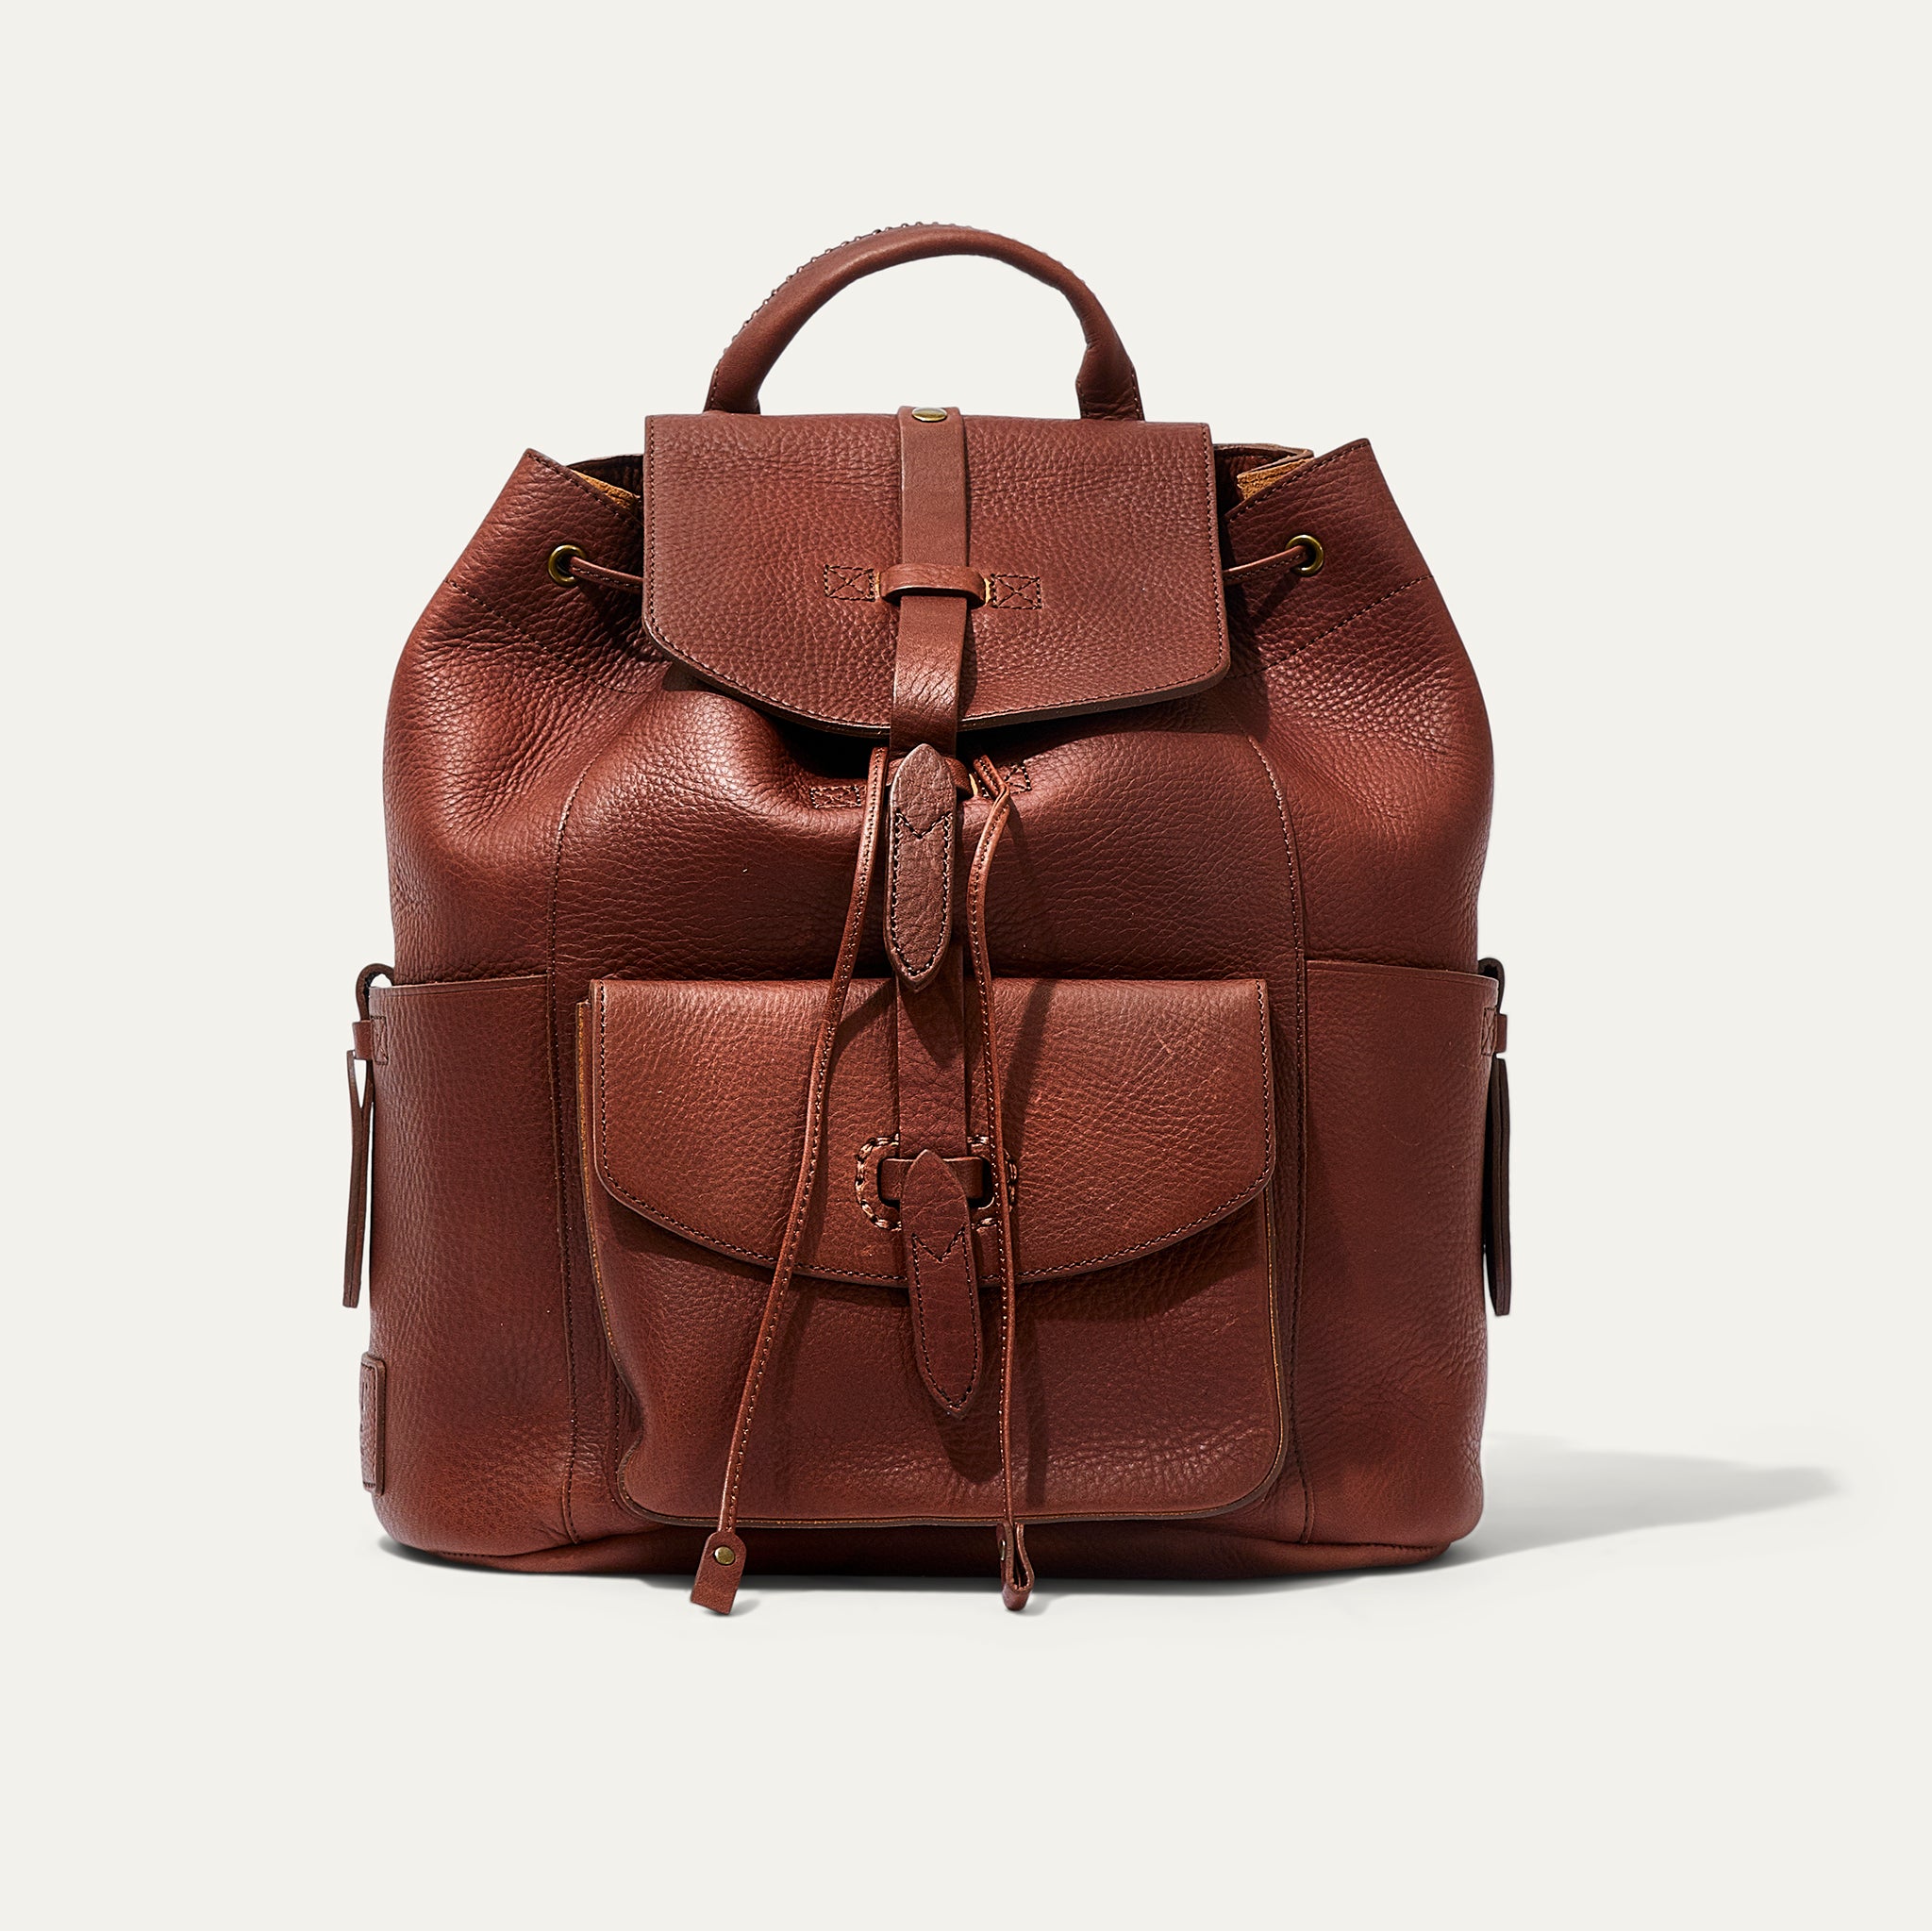 RAINIER LEATHER BACKPACK BROWN – Will Leather Goods